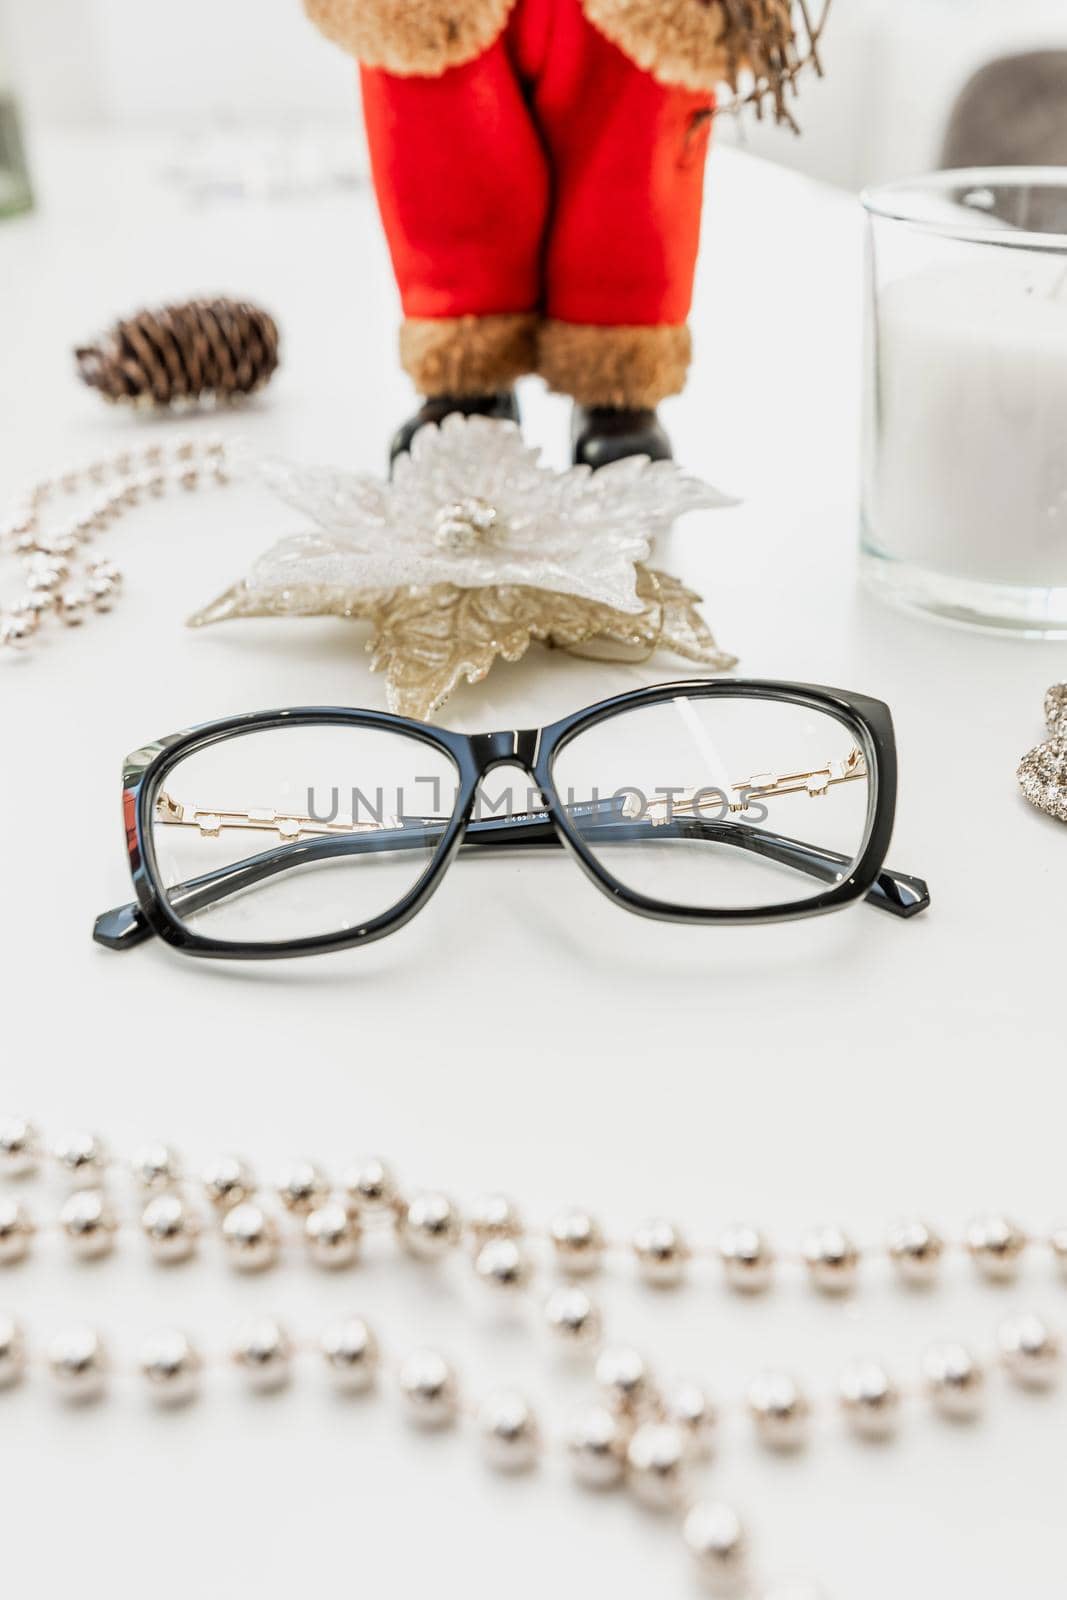 Glasses on a white table surrounded by beads close up